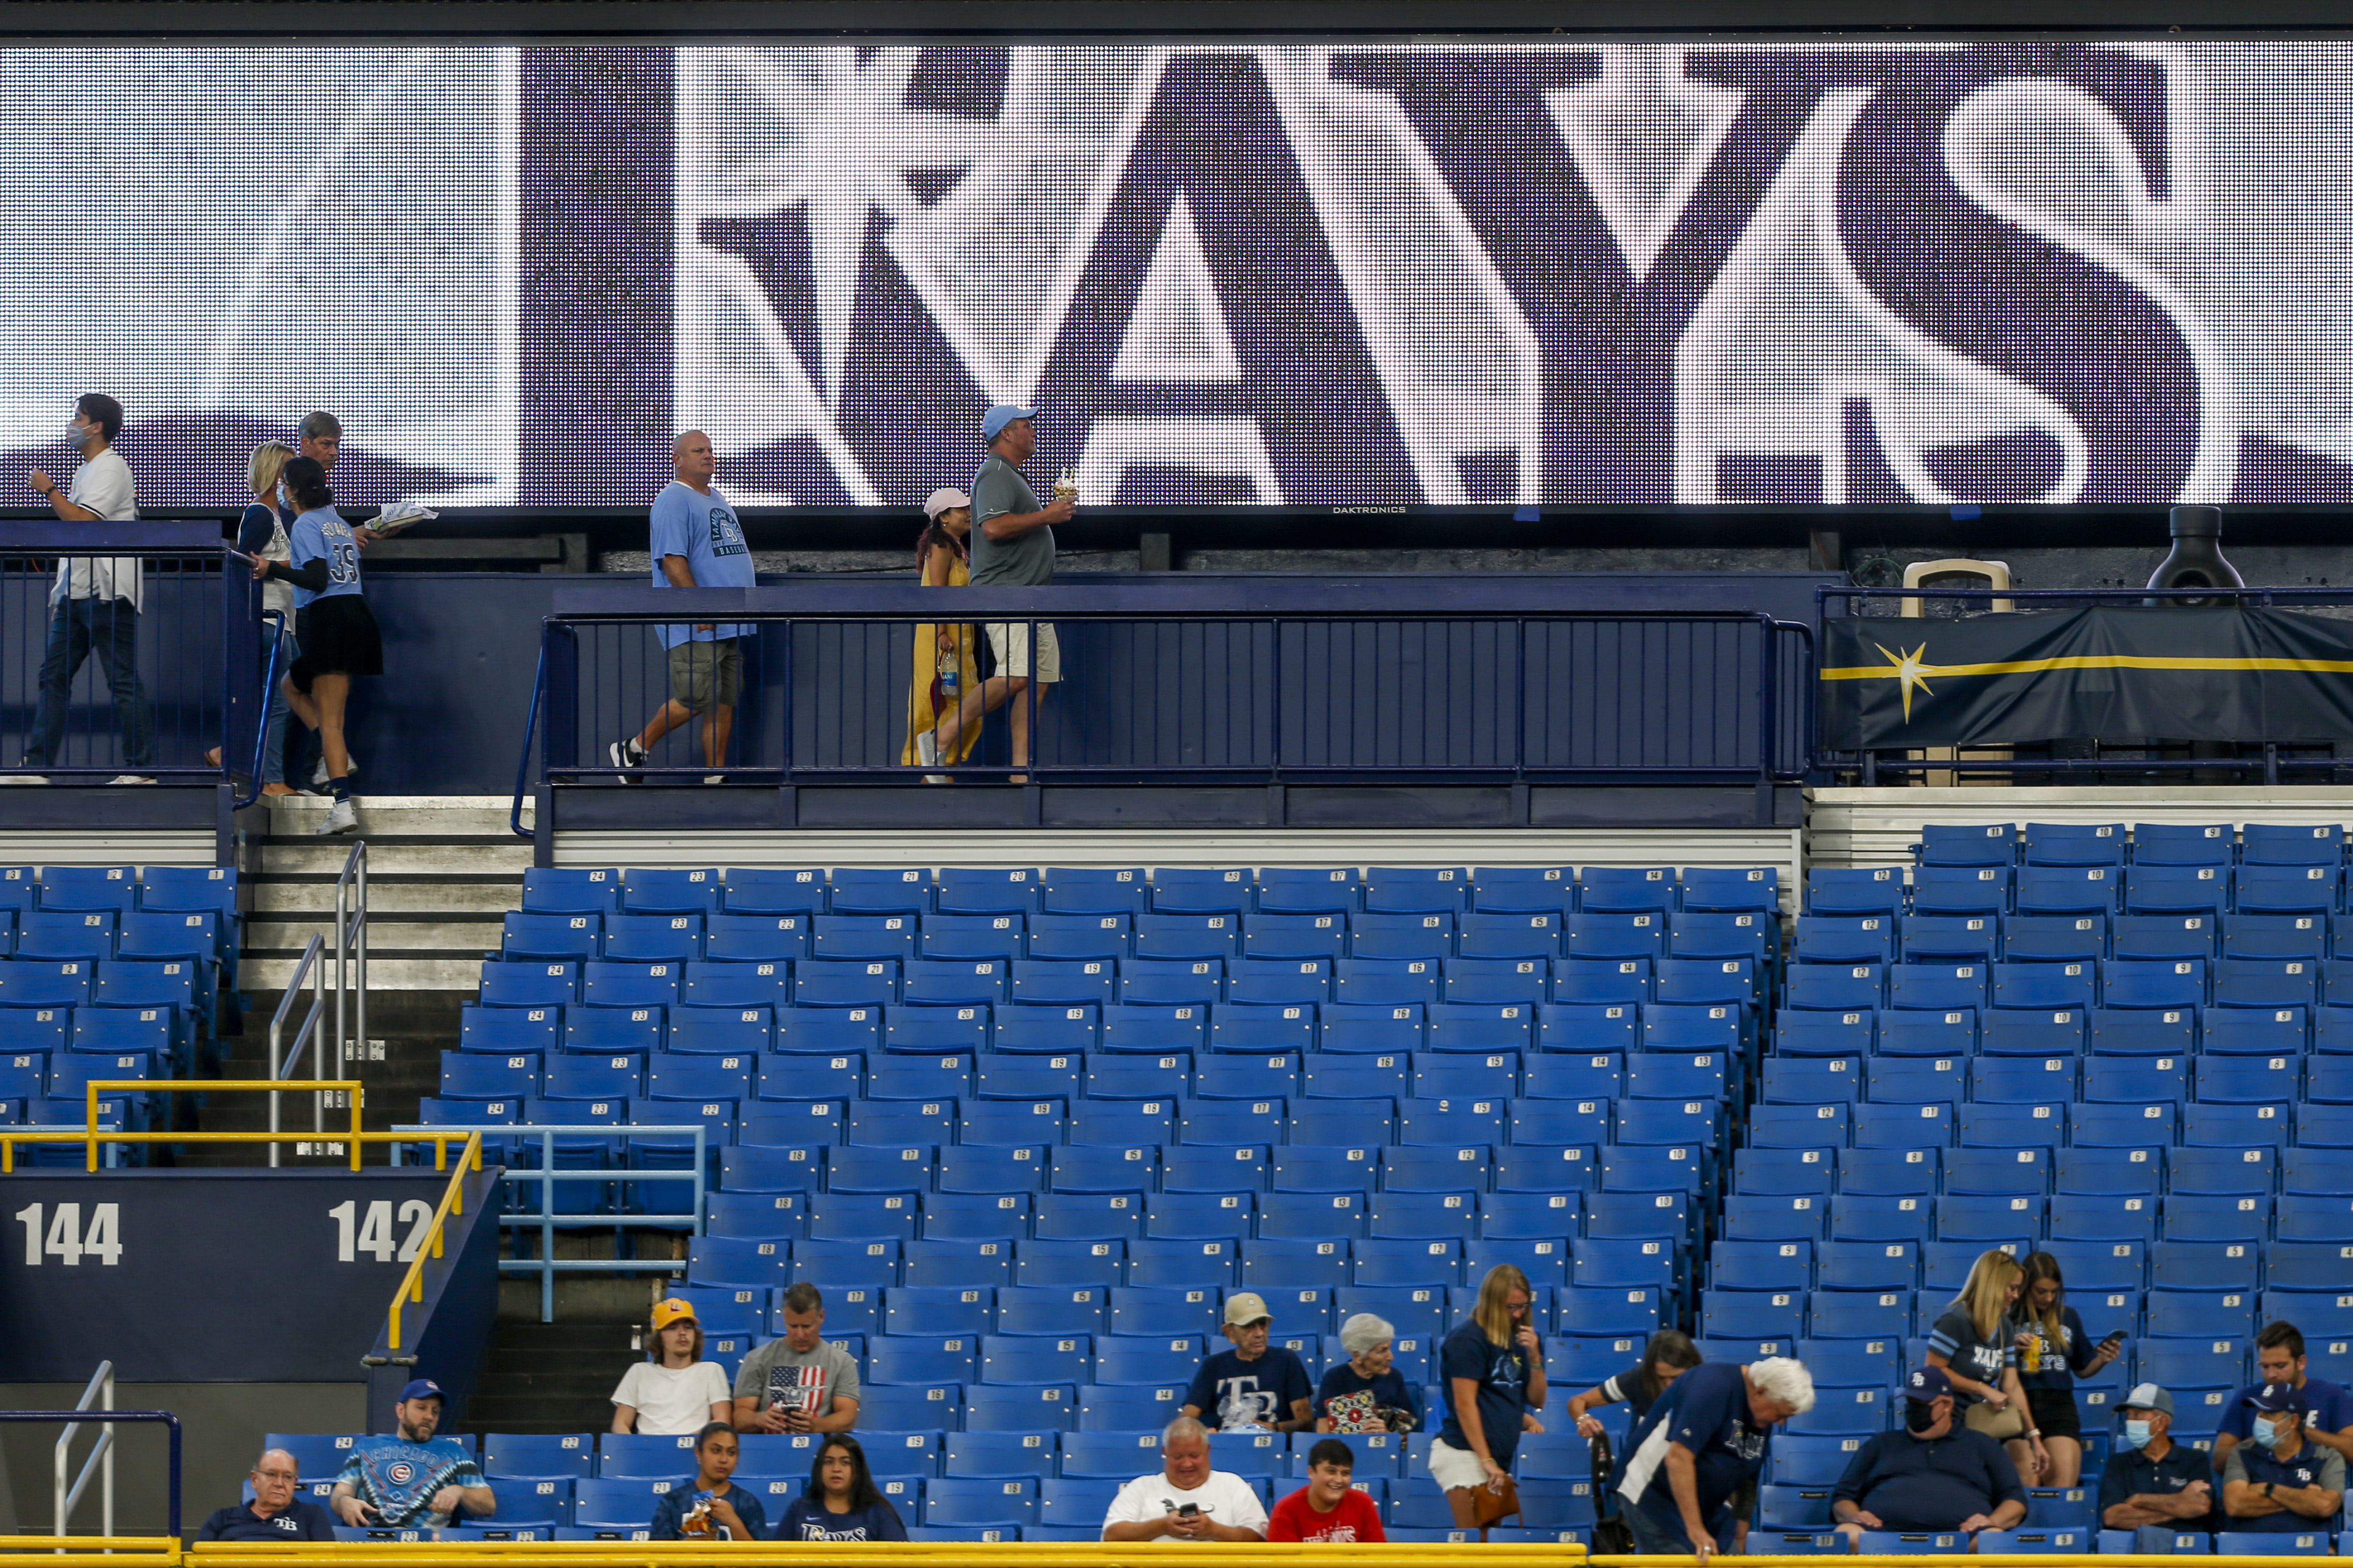 Tampa Bay Rays aren't worthy of praise after neglecting to spend